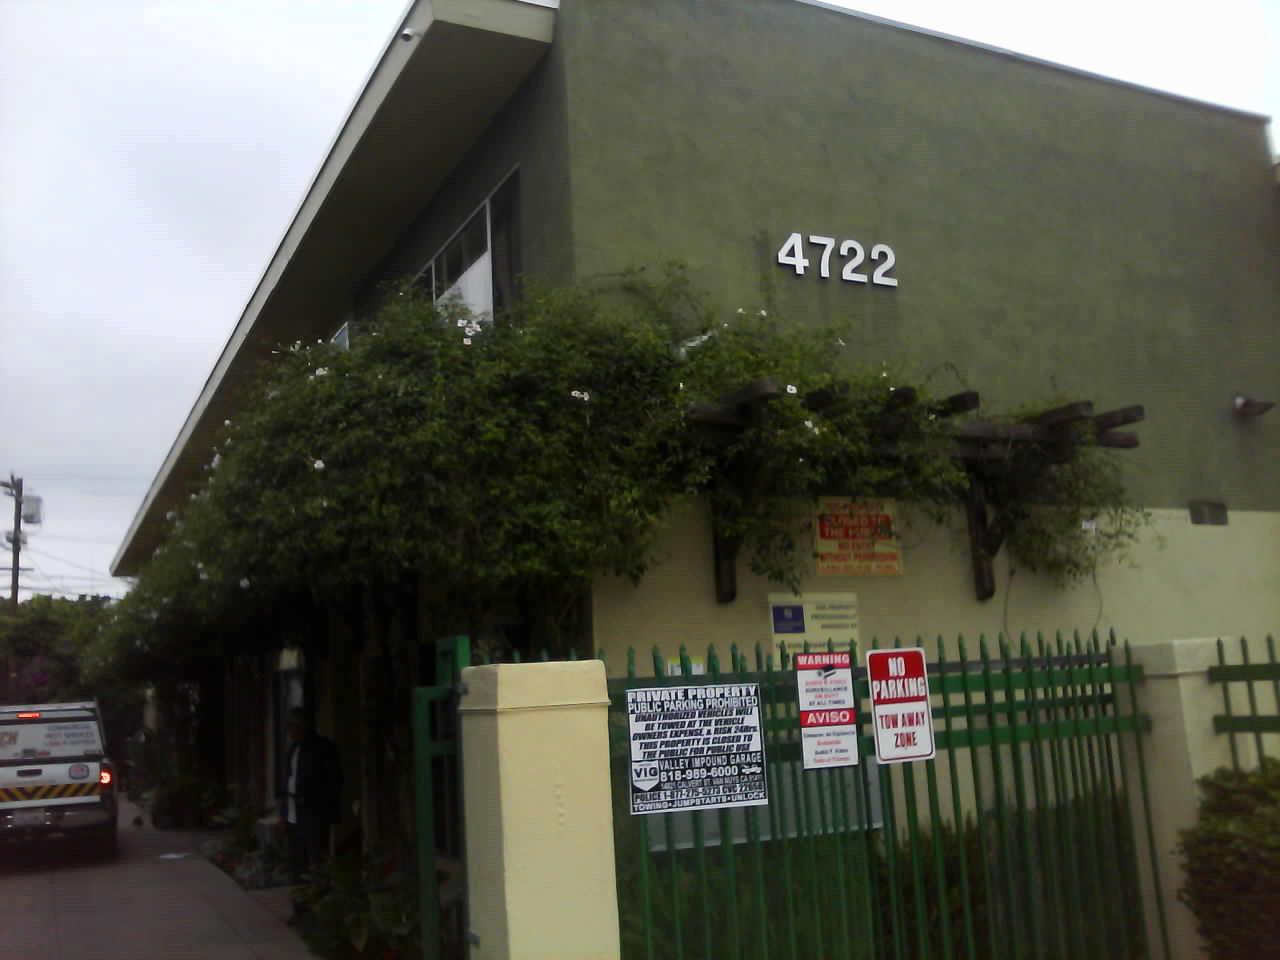 Corner view of 4722 Delano ll apartments showing Green building with ivy filled trellis attached to building